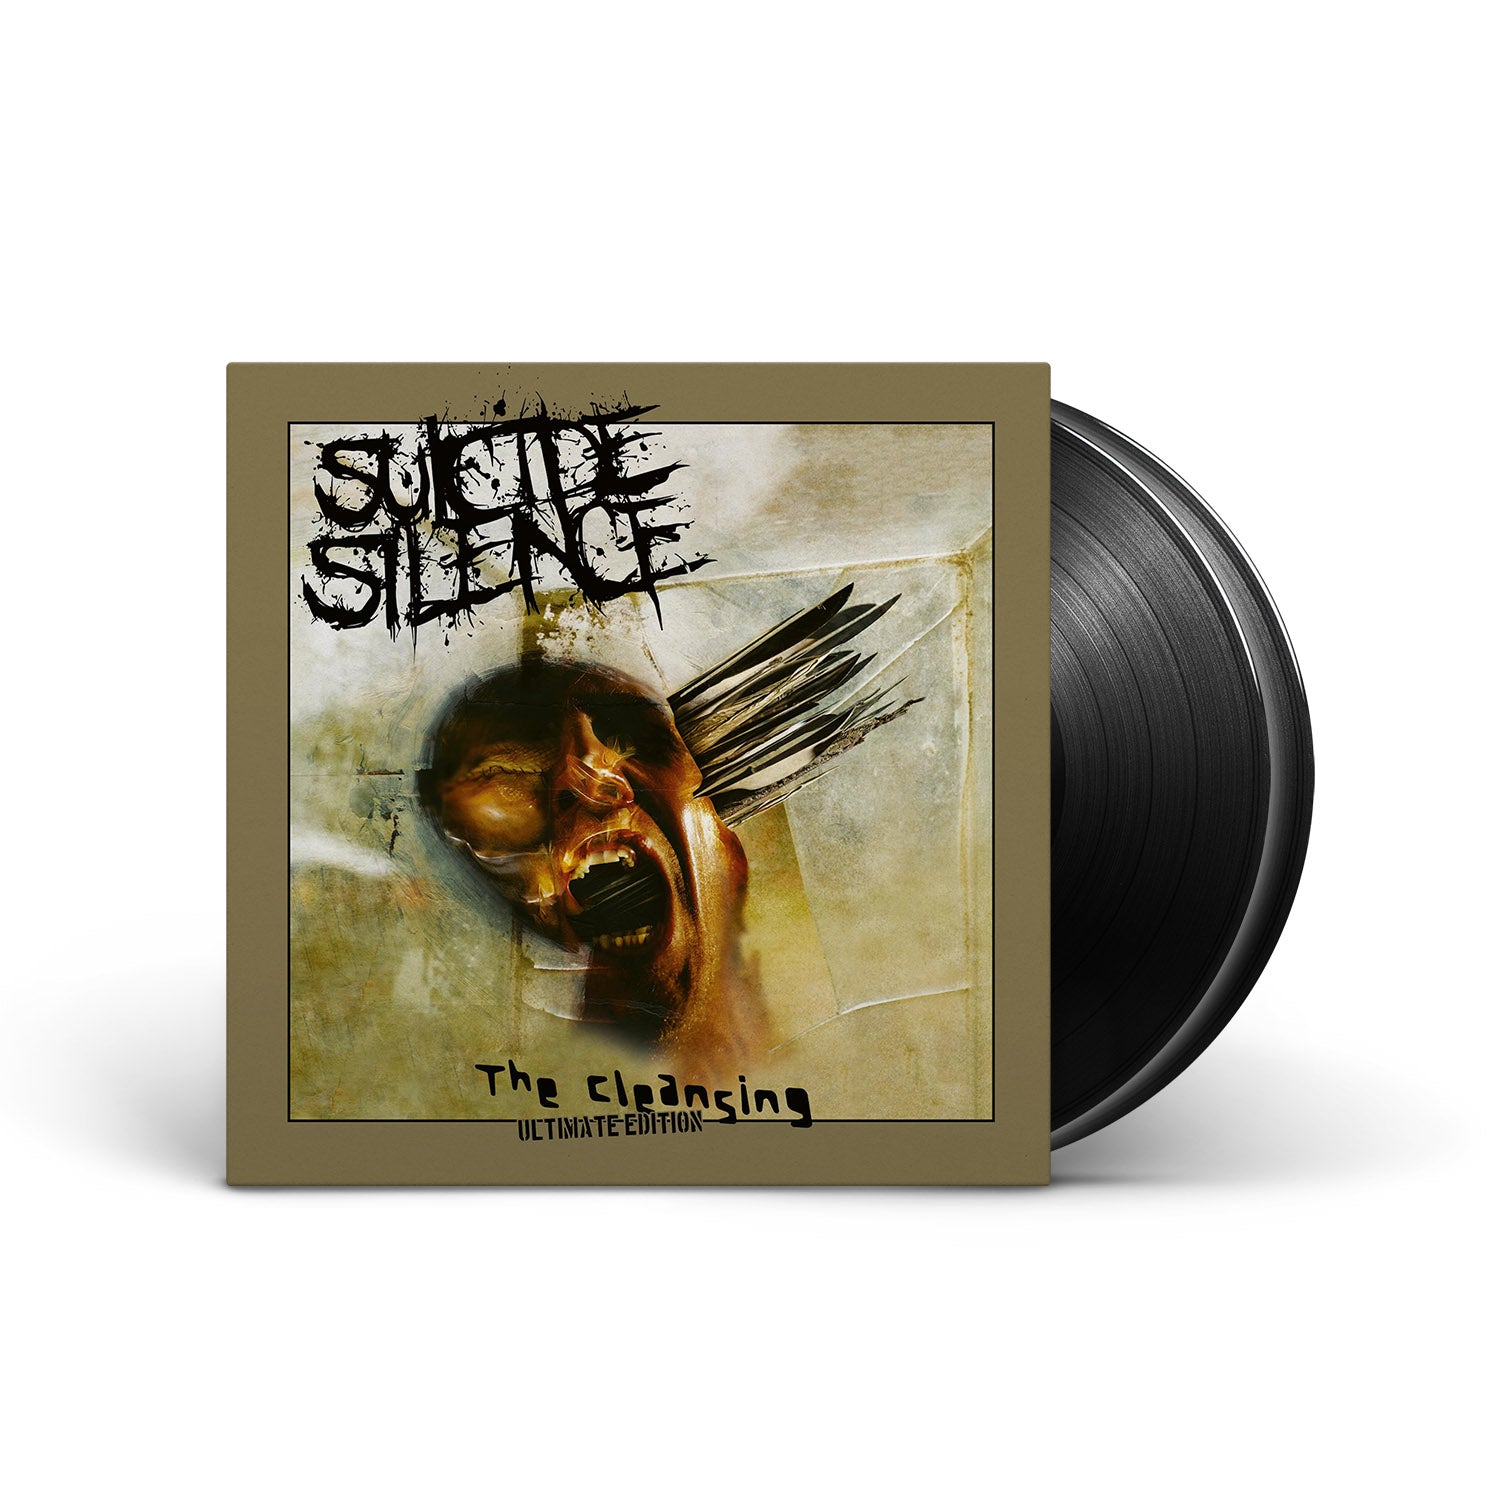 SUICIDE SILENCE - The Cleansing (Ultimate Edition) - 2xLP